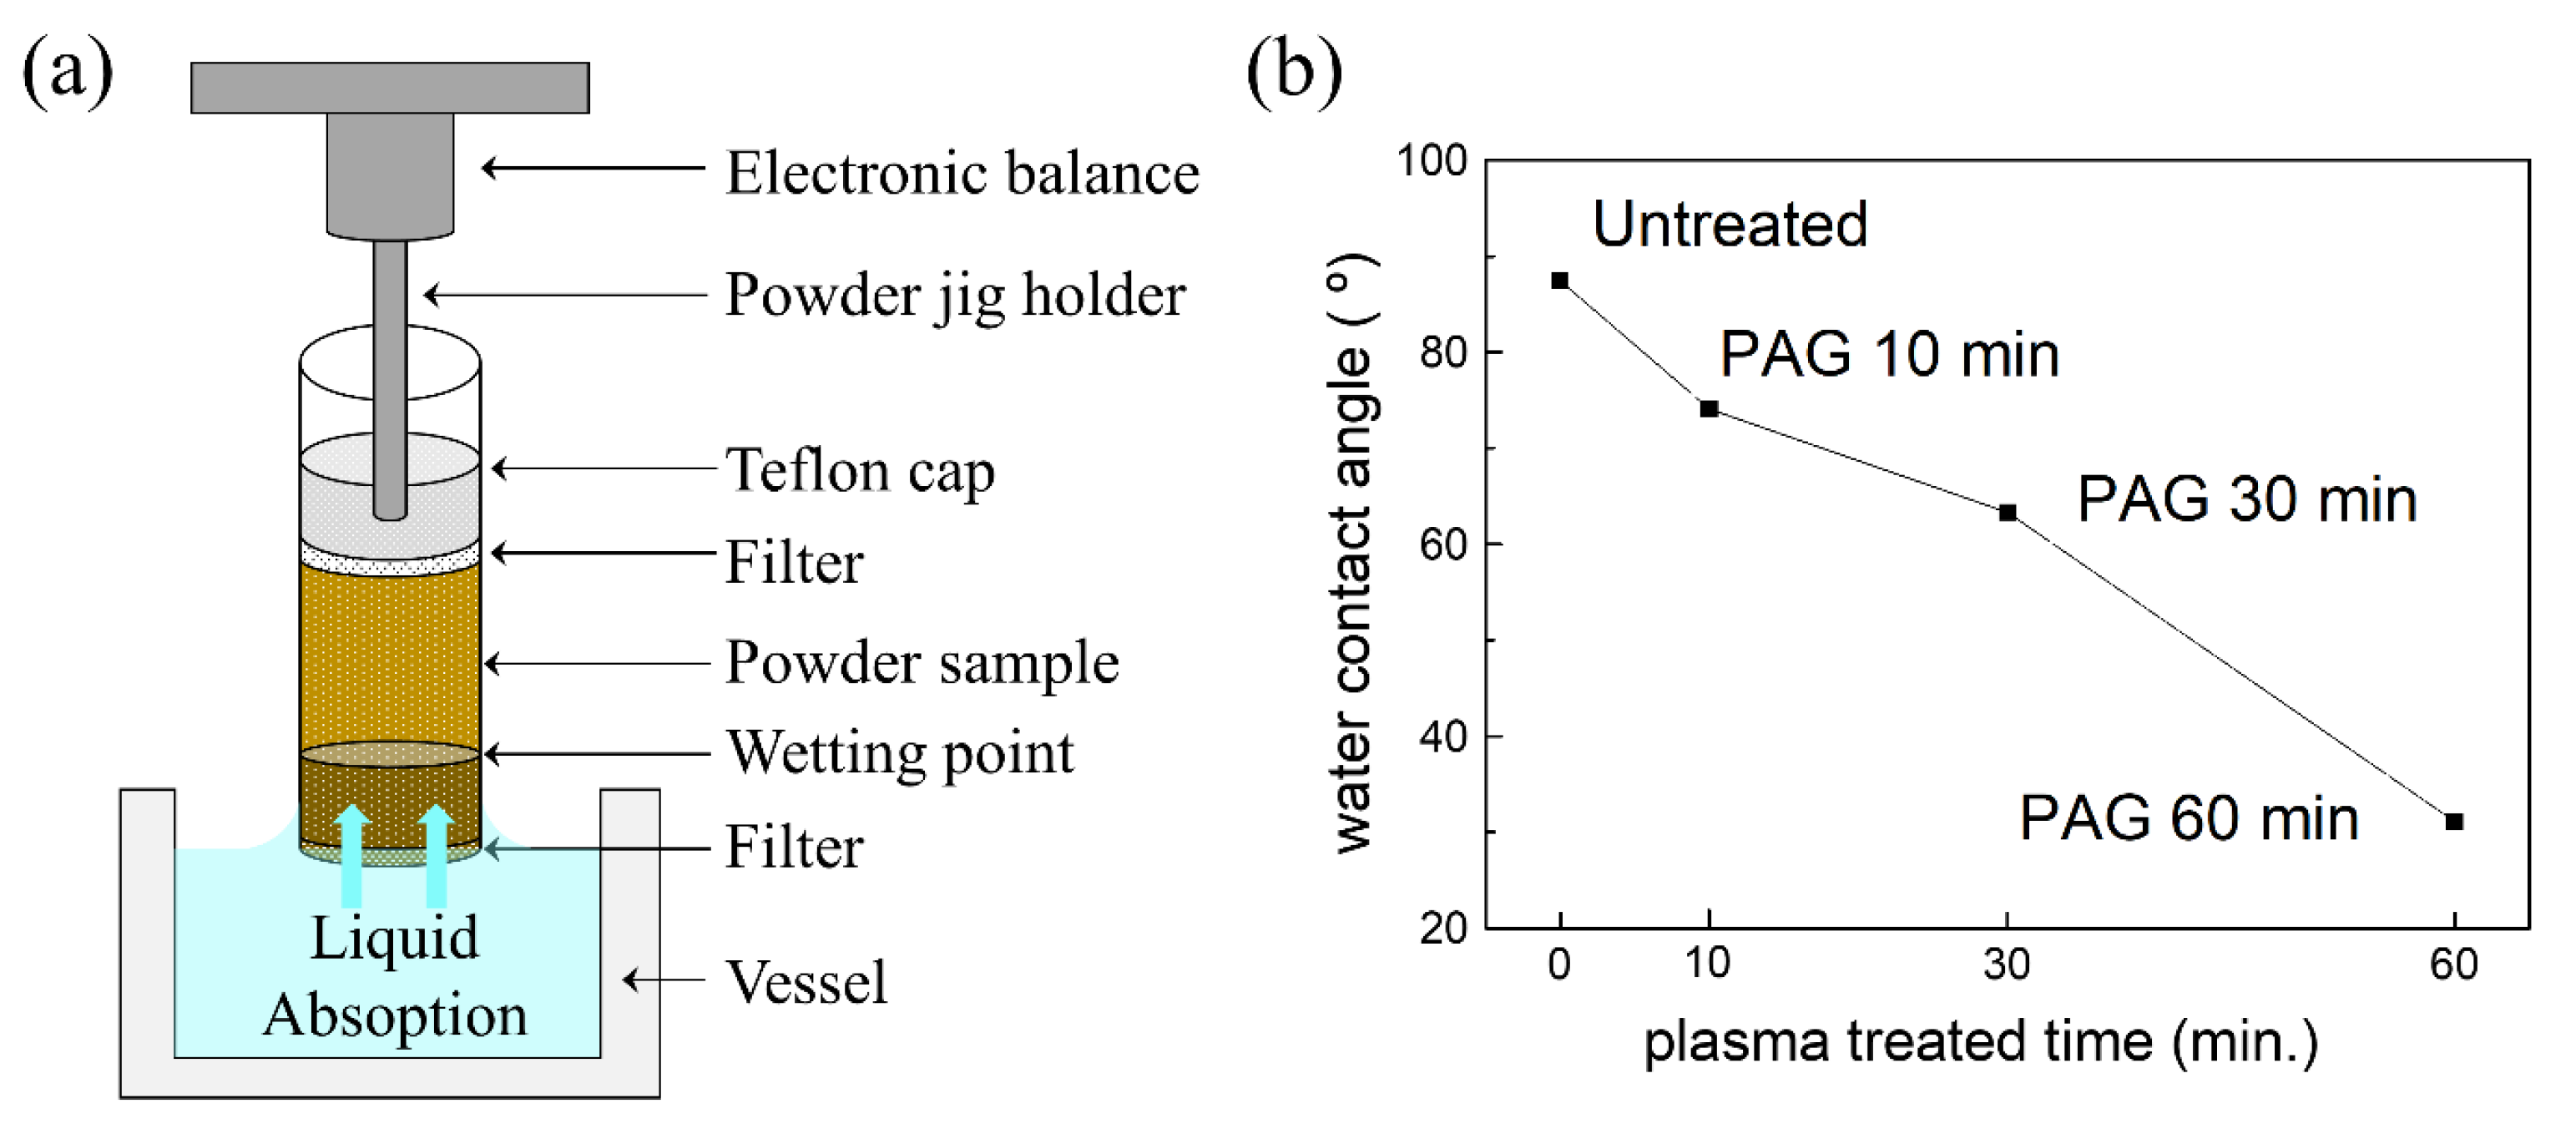 KR20160101977A - Surface treatment of particles and their use